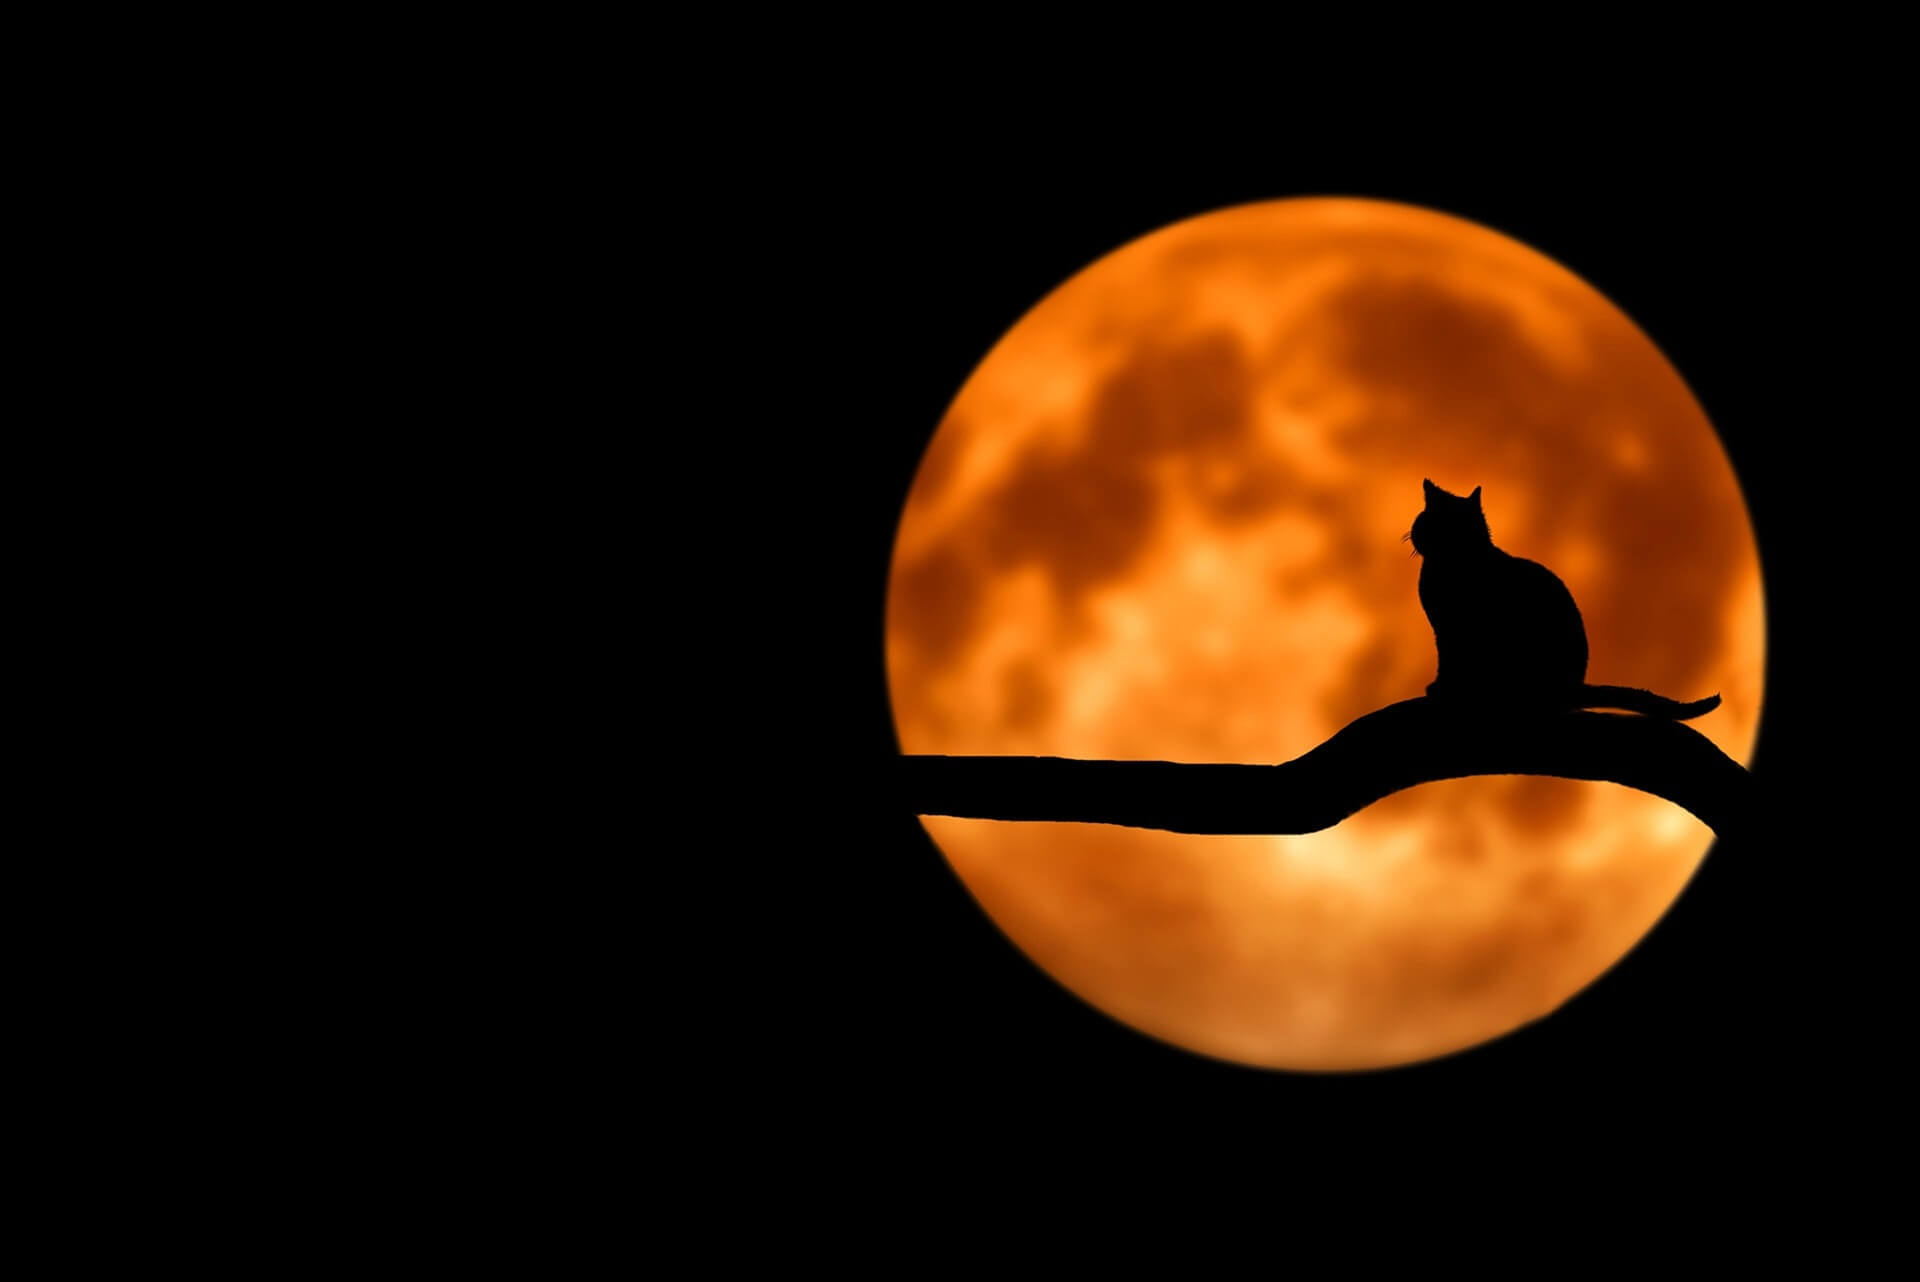 Pexels image of orange full moon to right of picture with silhouette of black cat on a tree branch